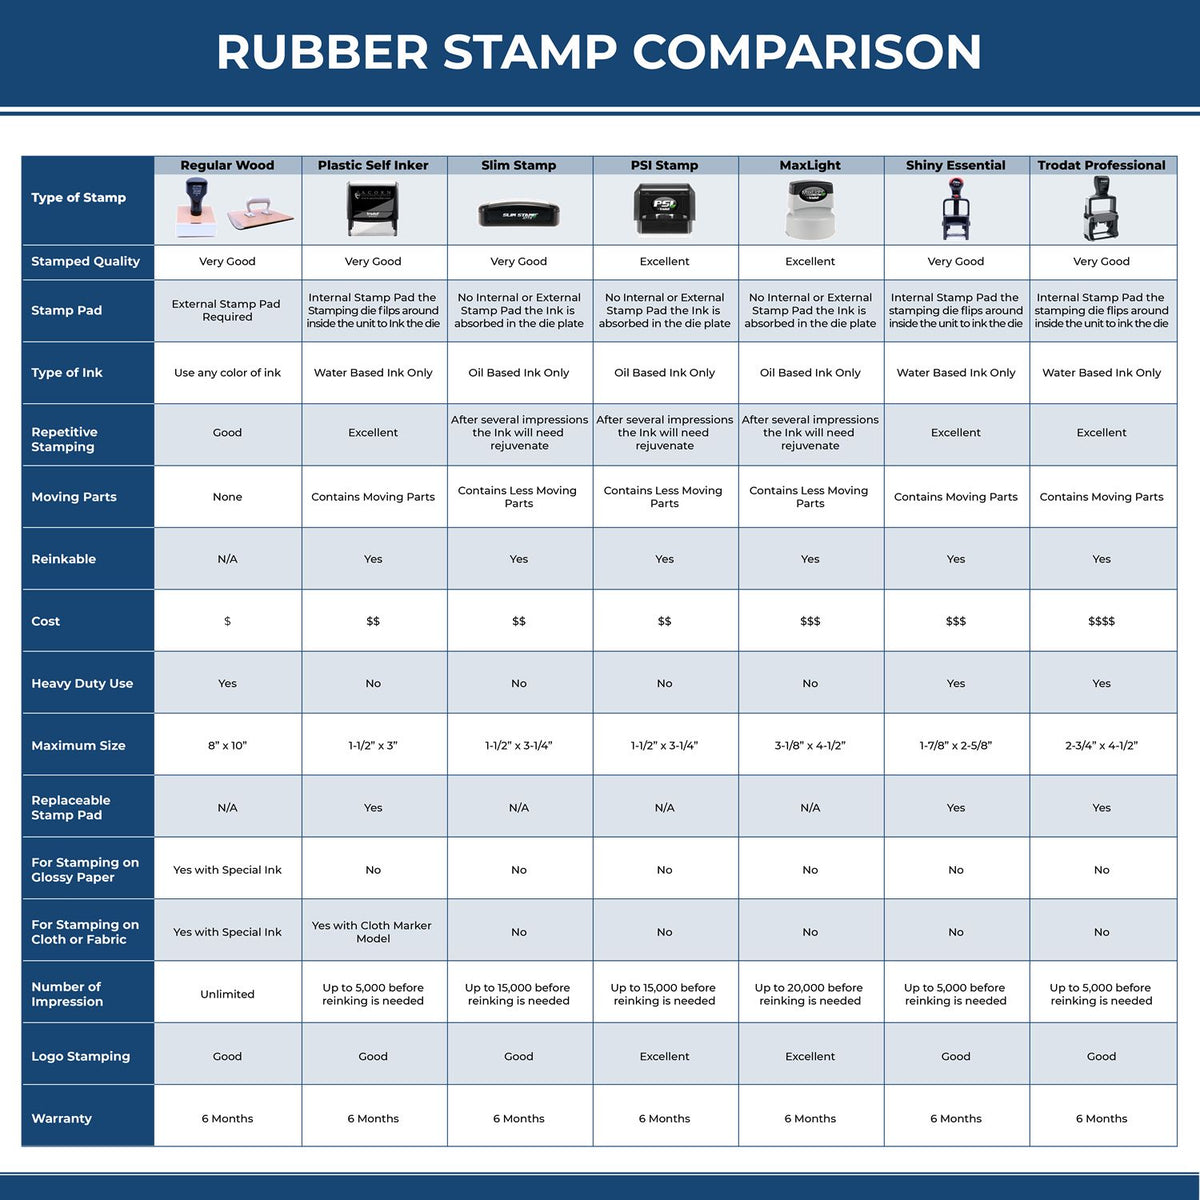 Large Government Exhibit Rubber Stamp 4603R Rubber Stamp Comparison